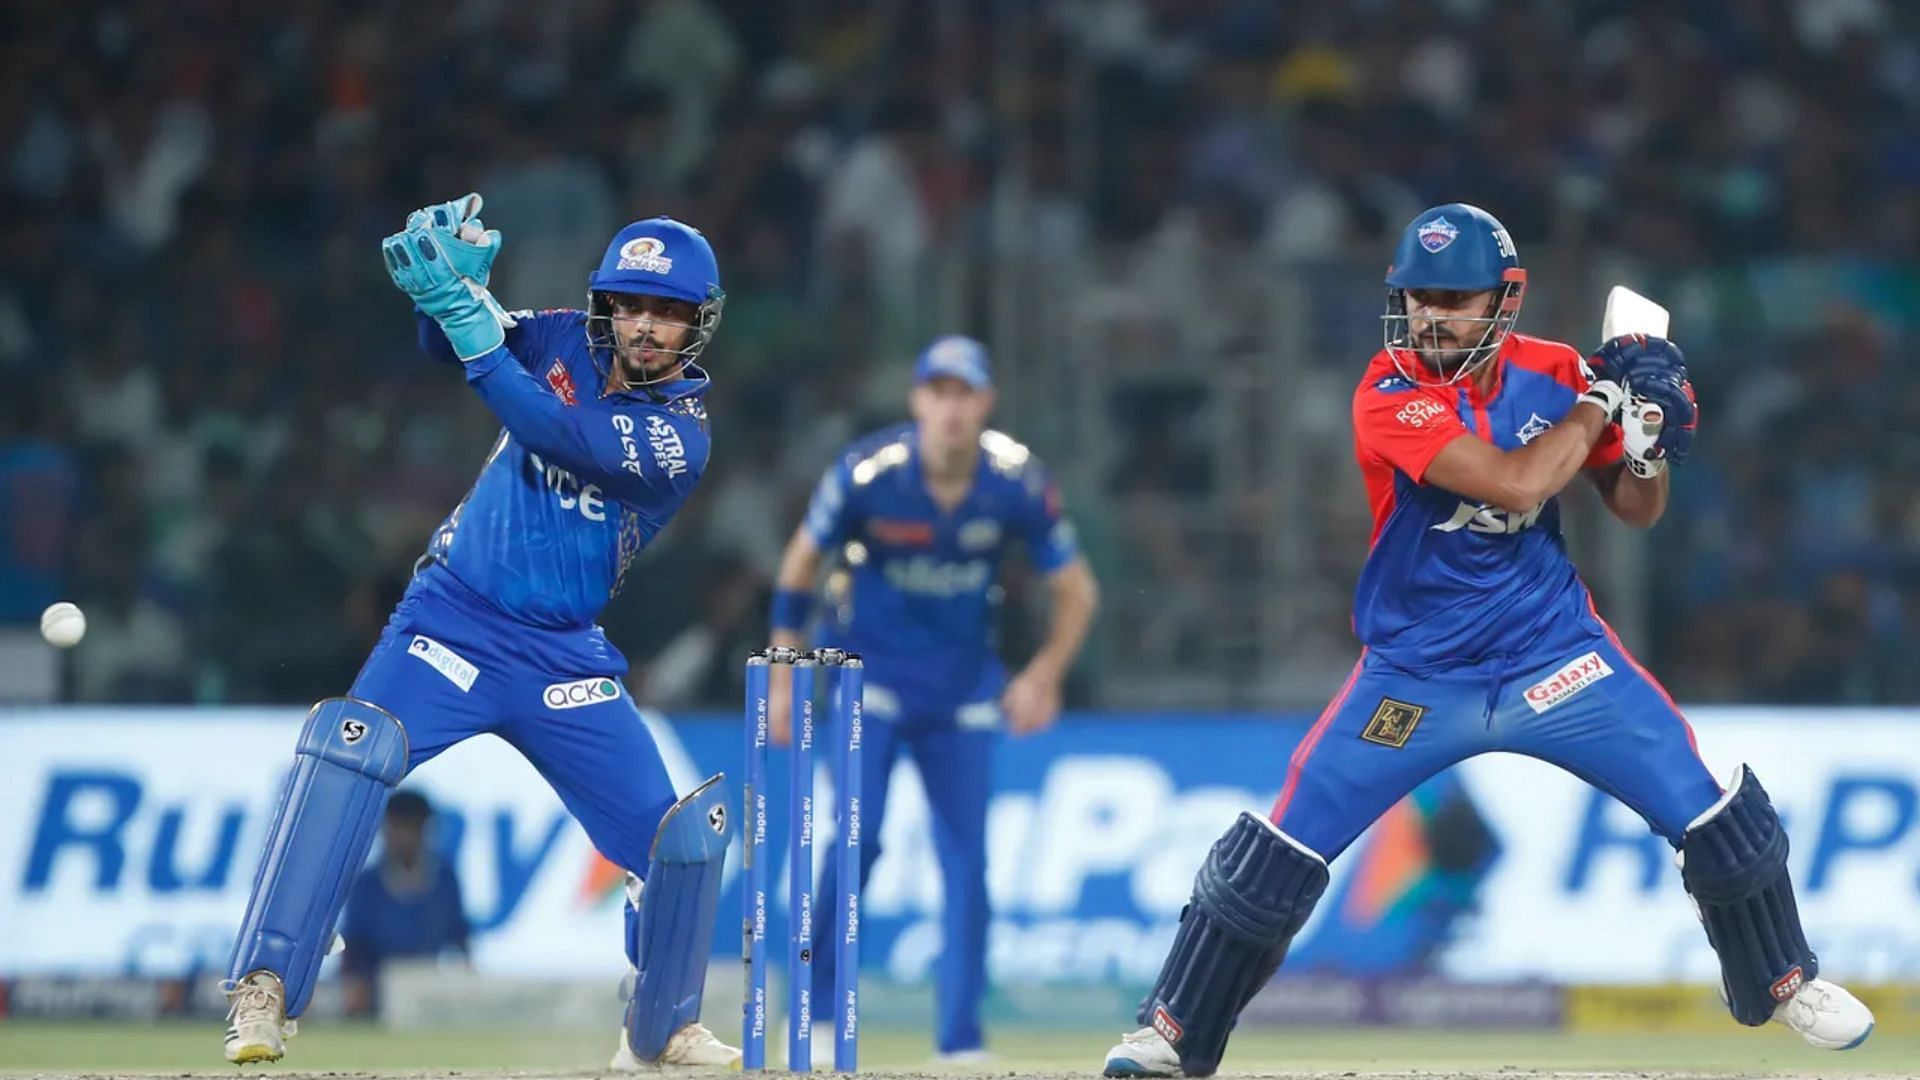 Could Manish Pandey turn his and DC